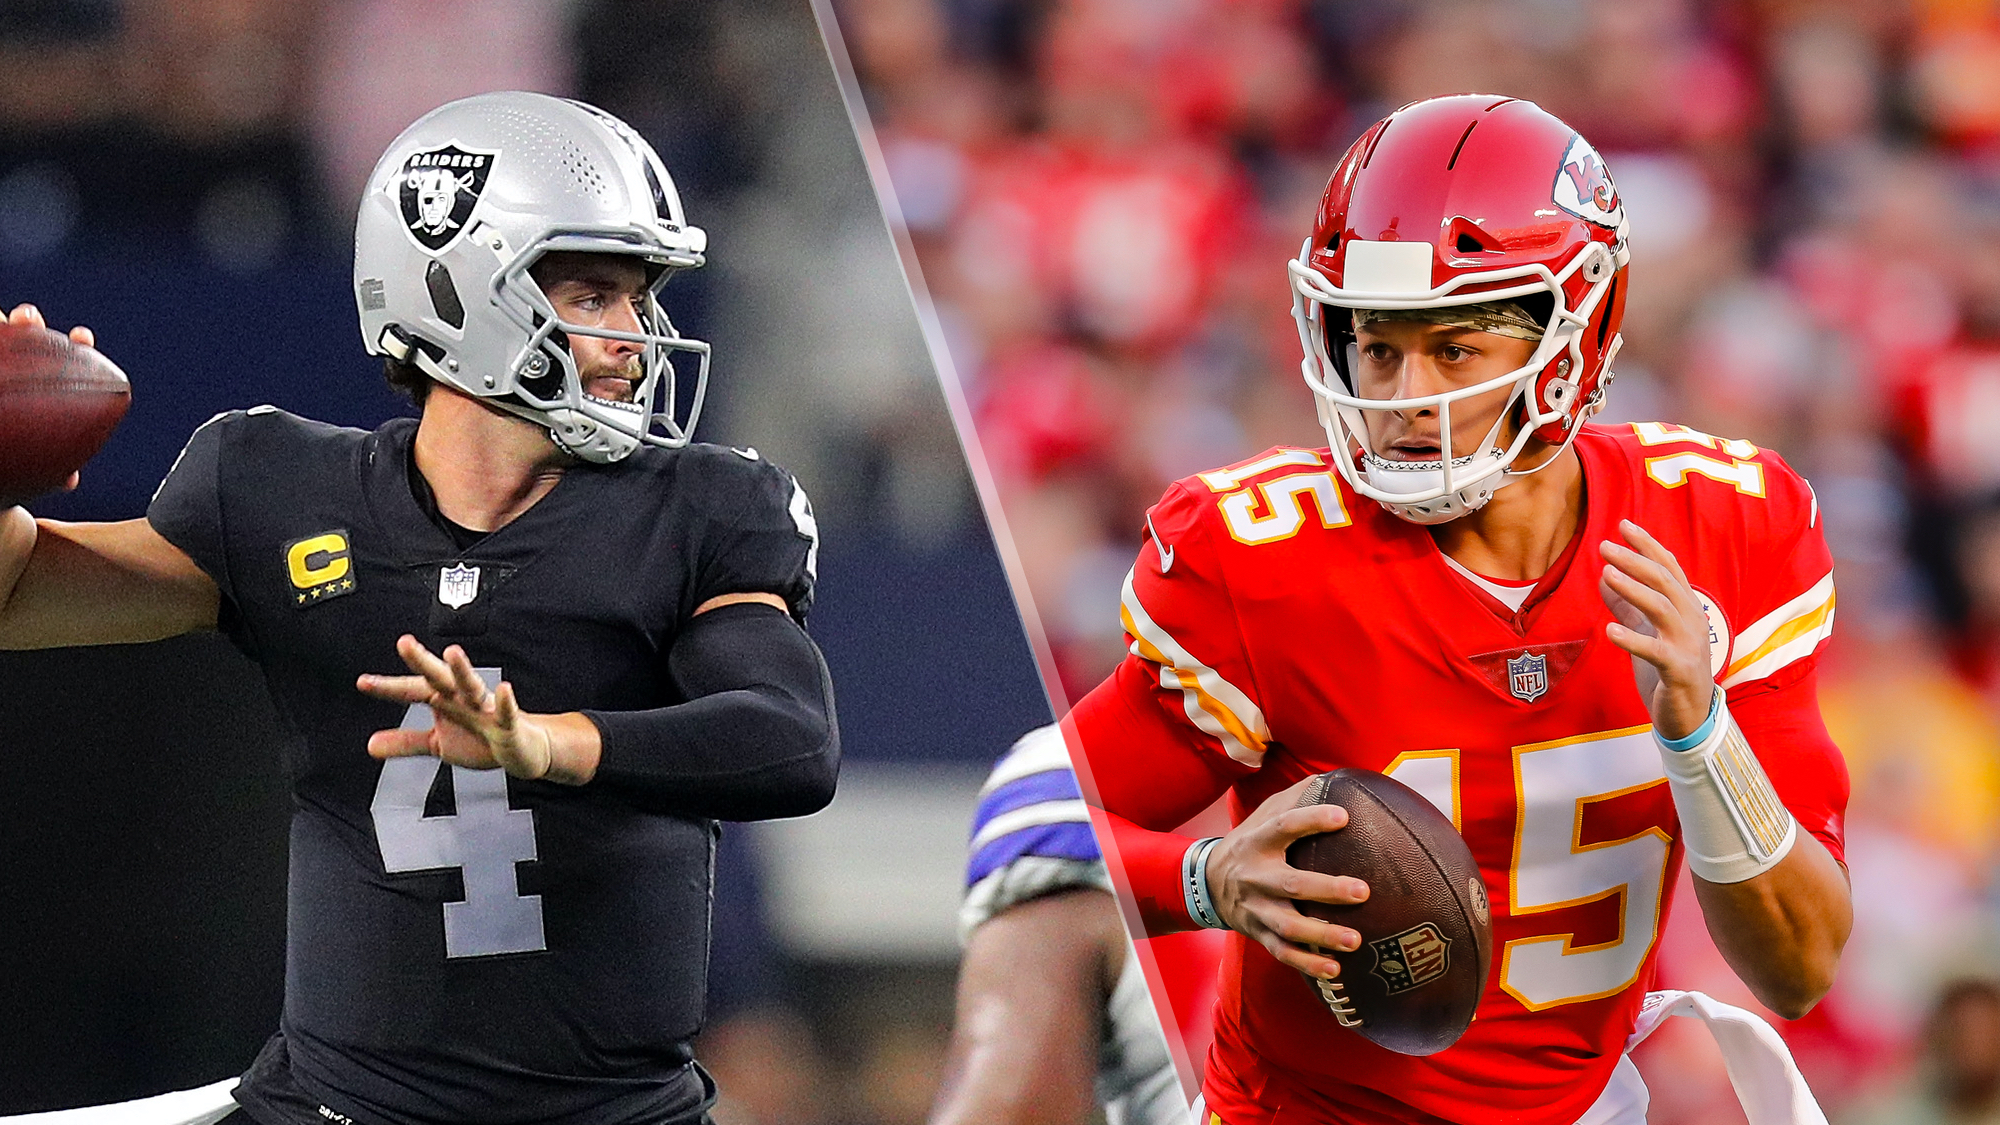 Raiders vs Chiefs live stream is today: How to watch NFL week 14